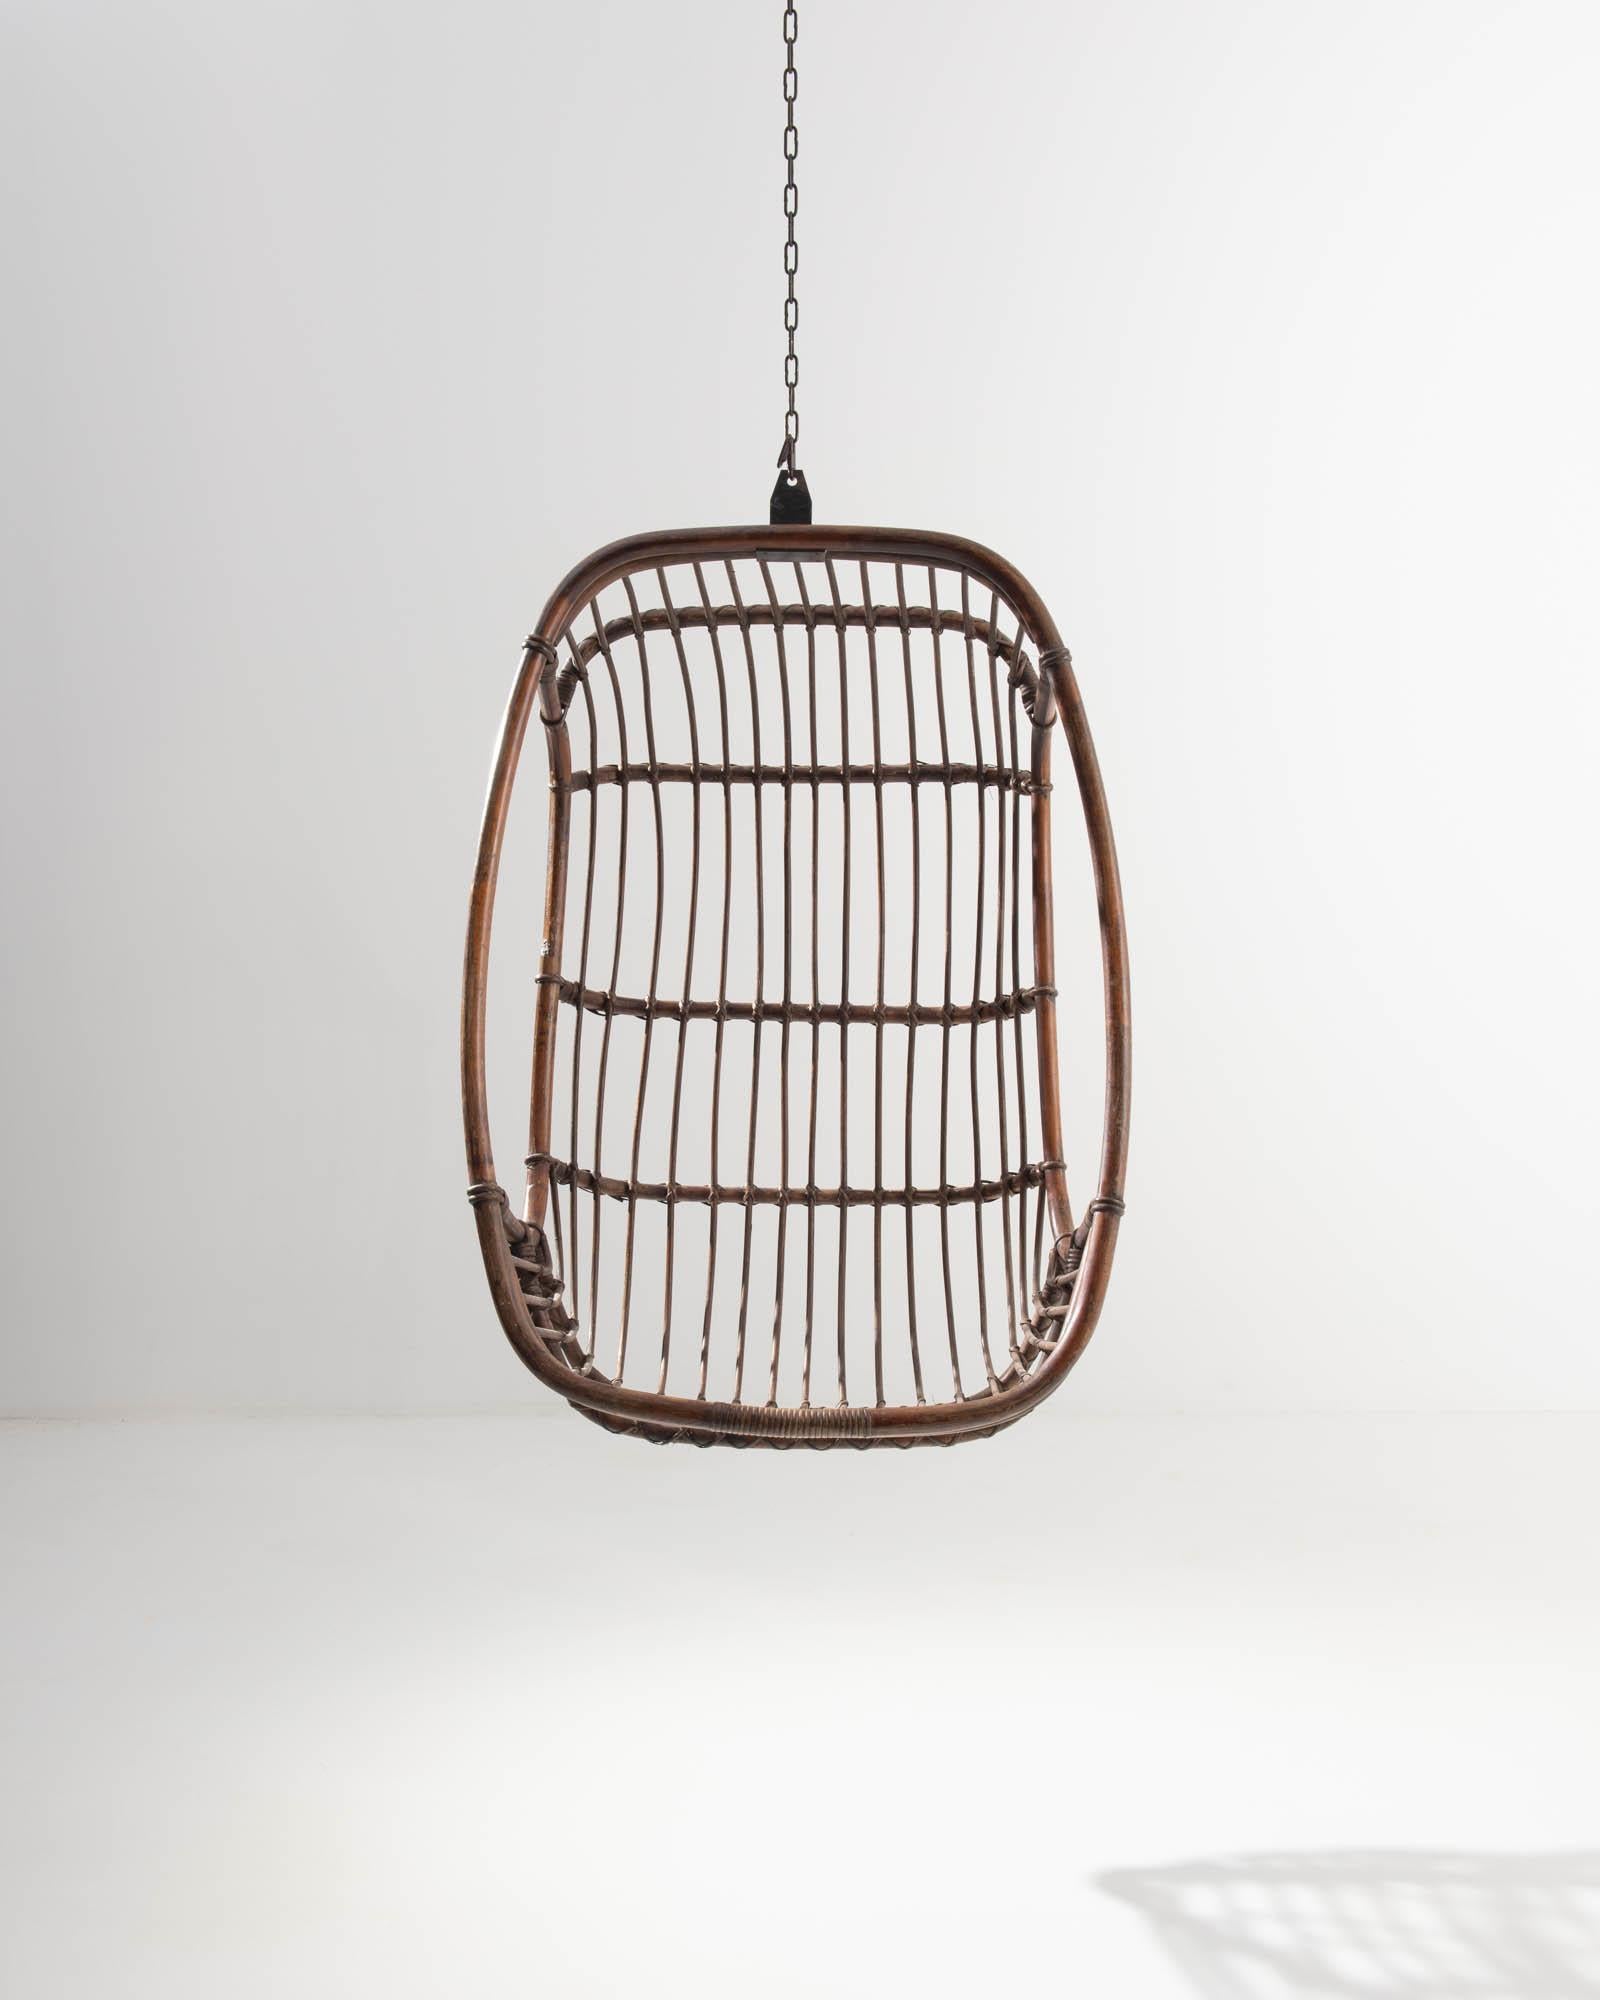 A rattan hanging chair made in 20th century, France. With a thick rattan frame, thin curved spindles, and neatly woven wicker lashings, this chair presents a sumptuously curved form that gently cradles the body in a way that only an artisanal,